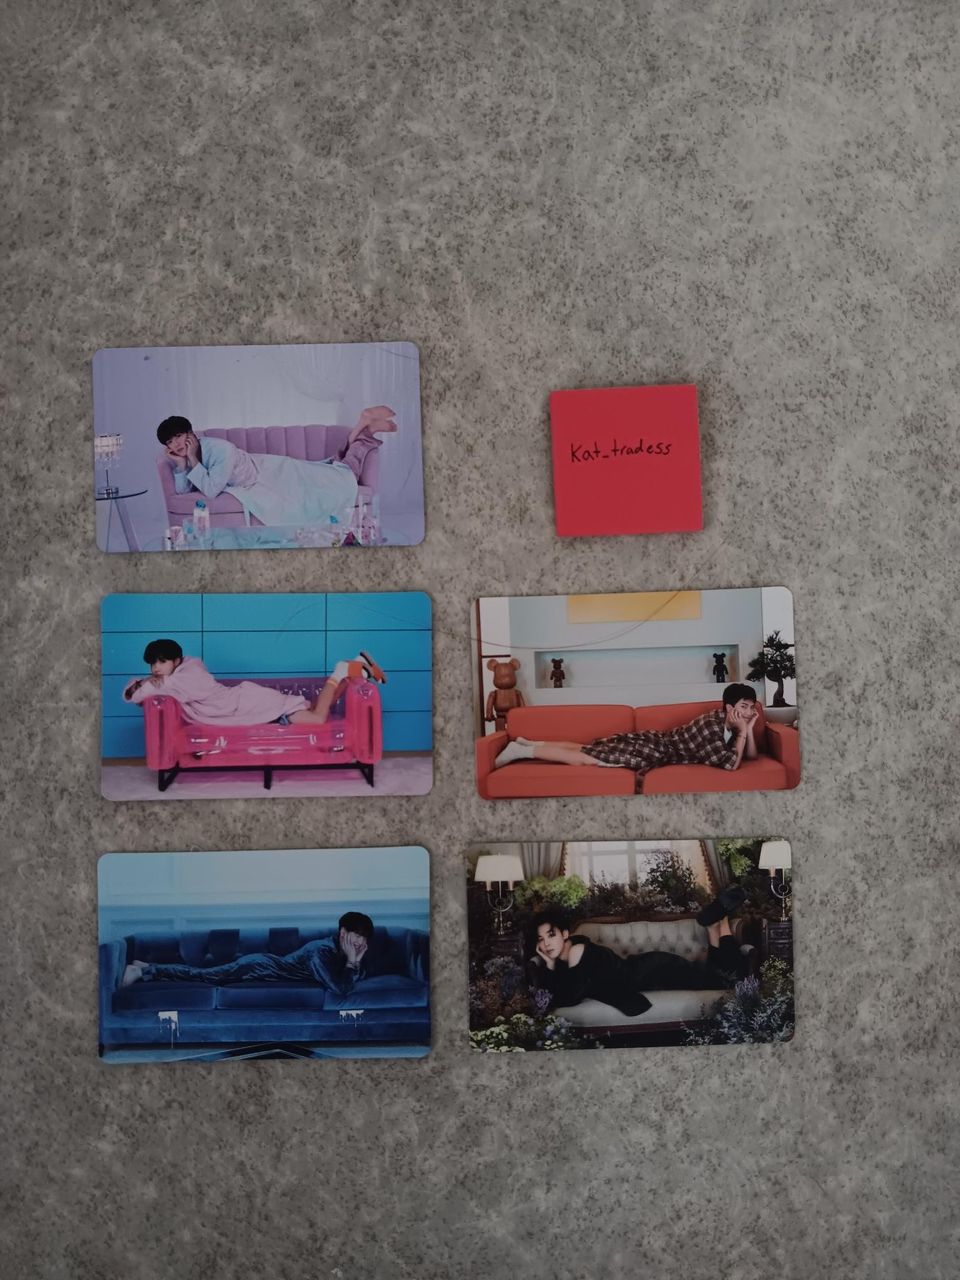 Bts be photocards